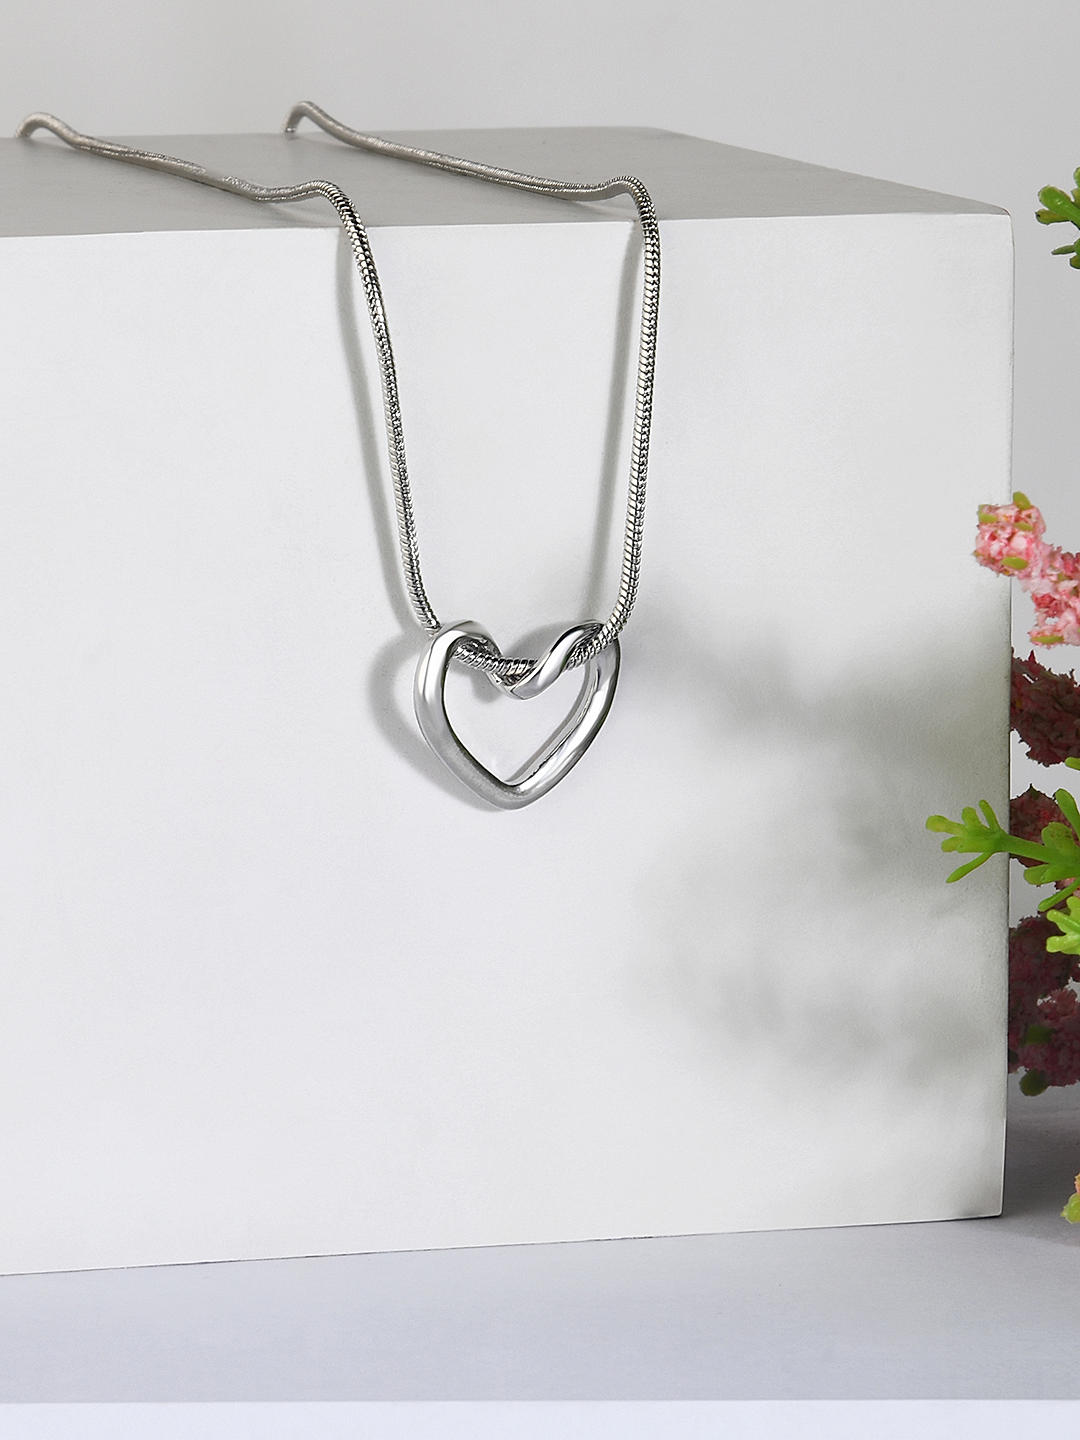 Floating Heart Sterling Silver Pendant Necklace, Heart Pendant, Heart  Necklace, Birthday Gift, Christmas Gift, Anniversary Gift, I love you